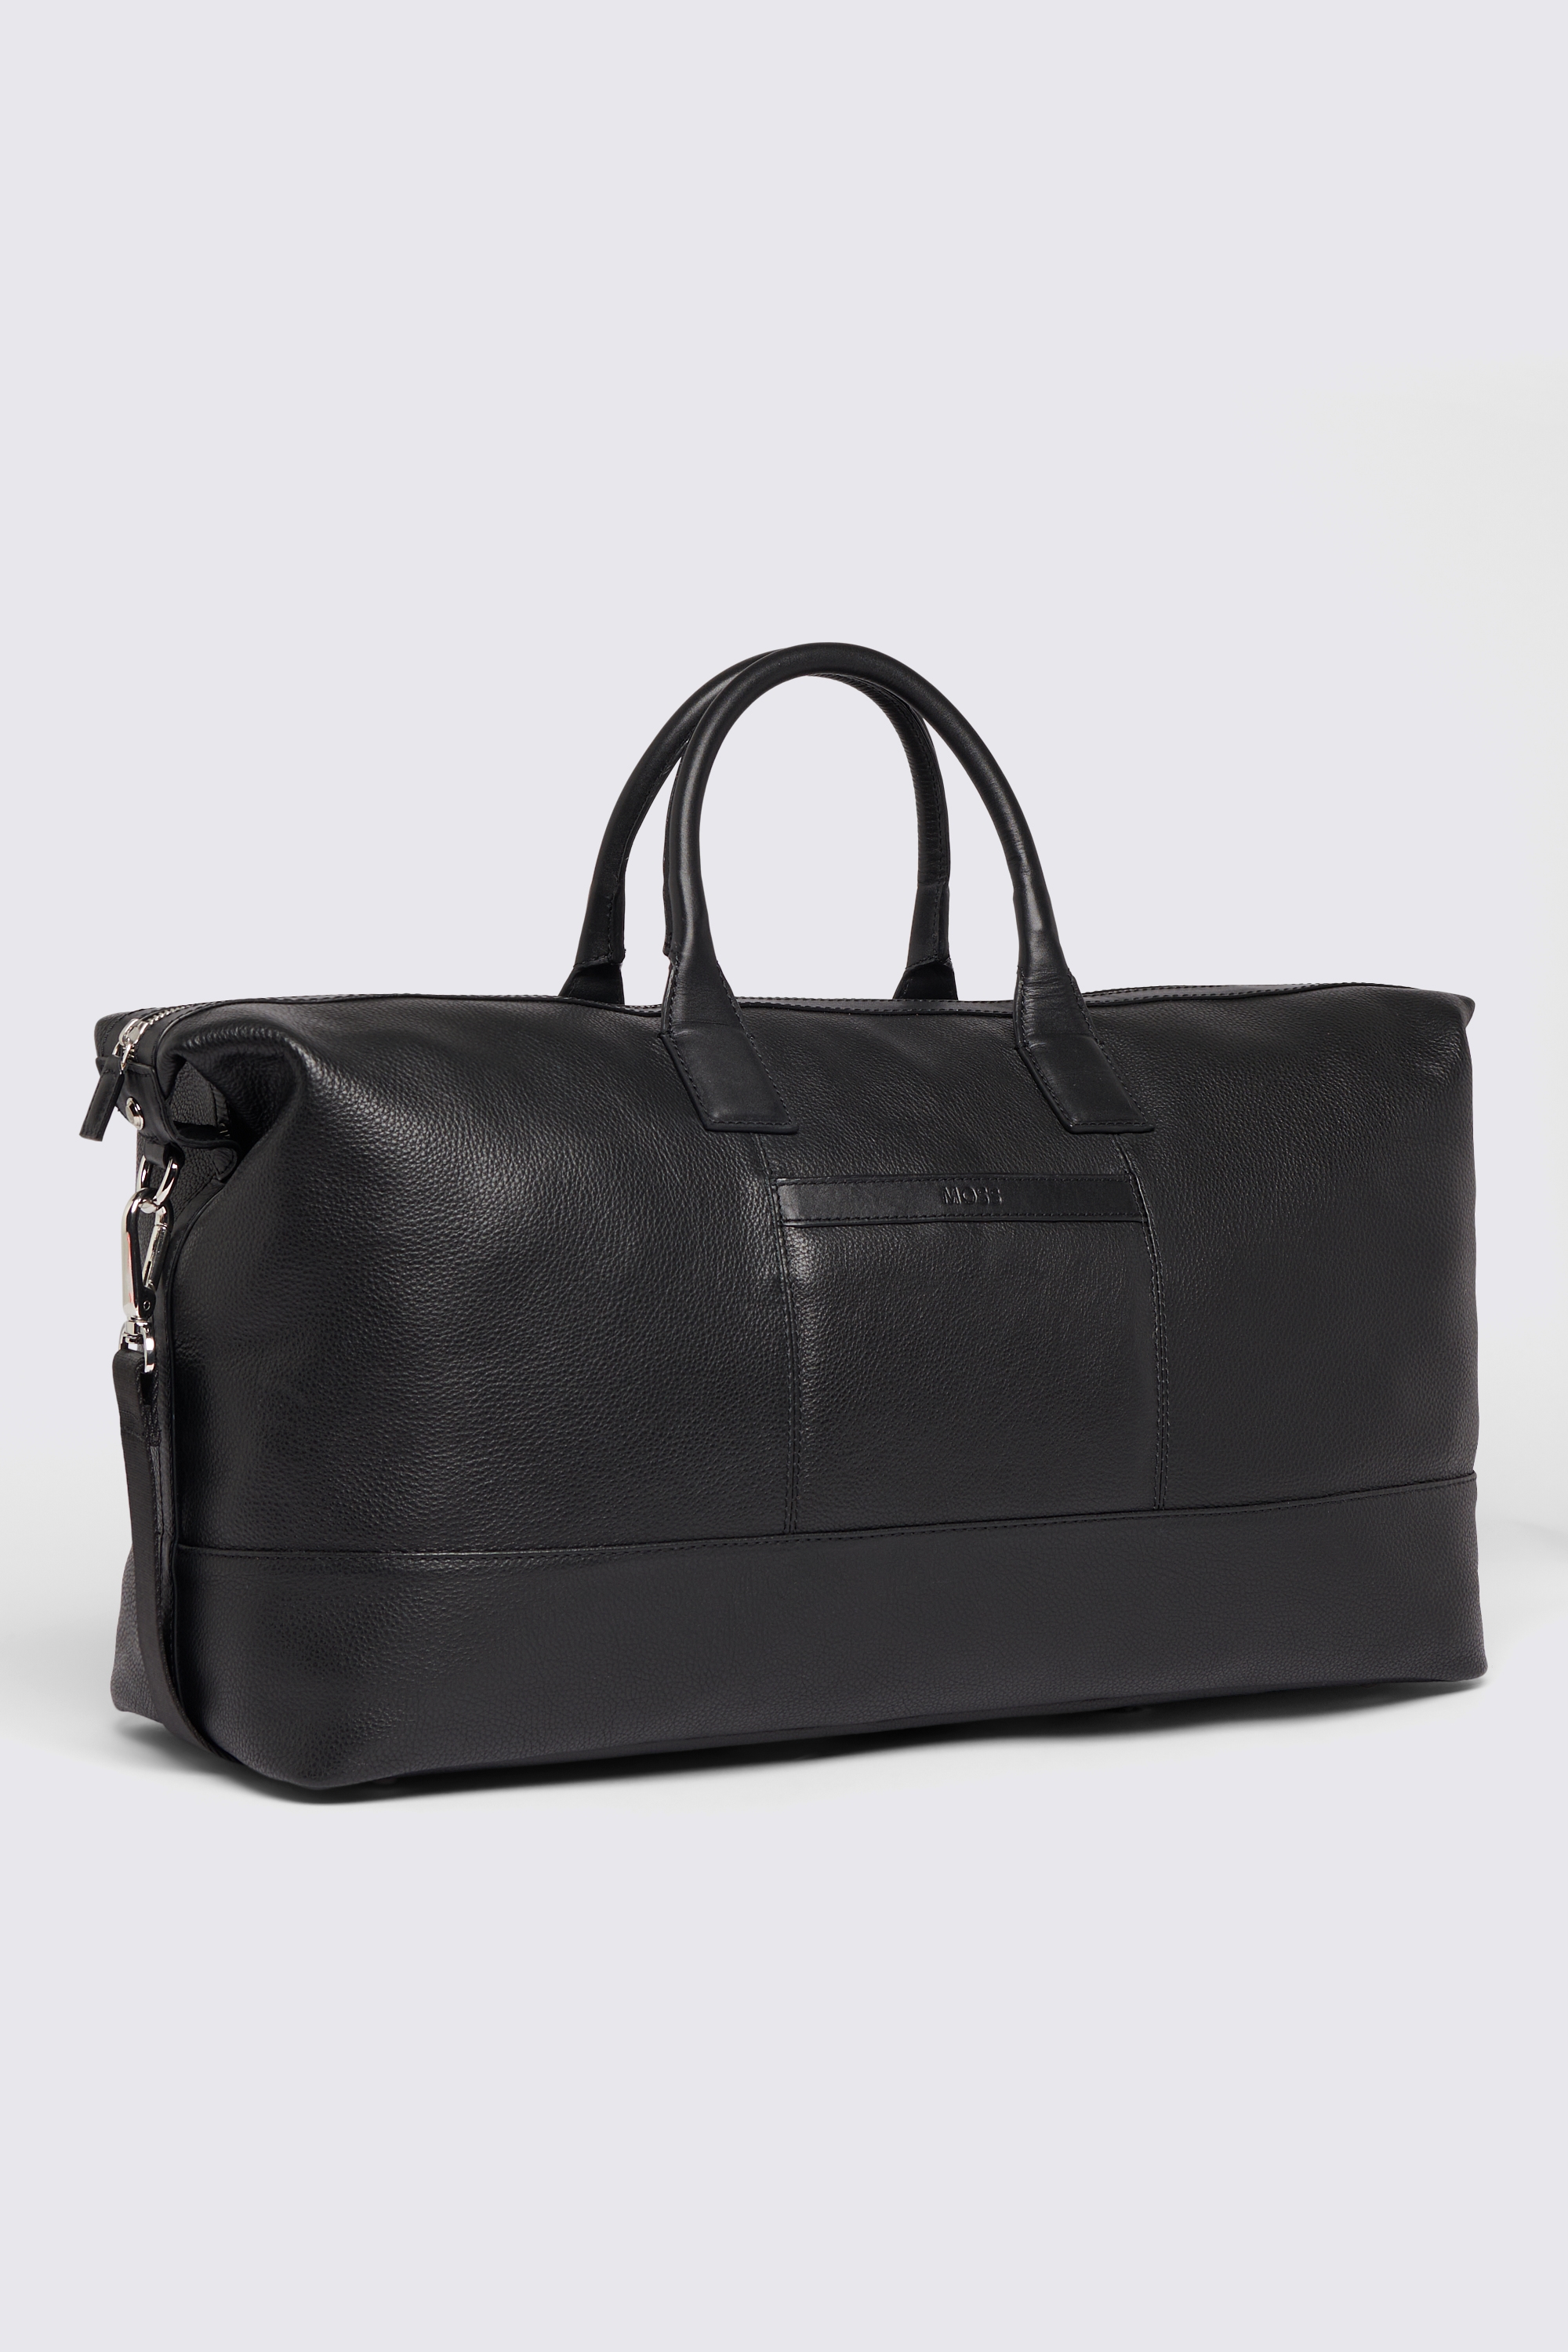 Black Grained Leather Holdall | Buy Online at Moss